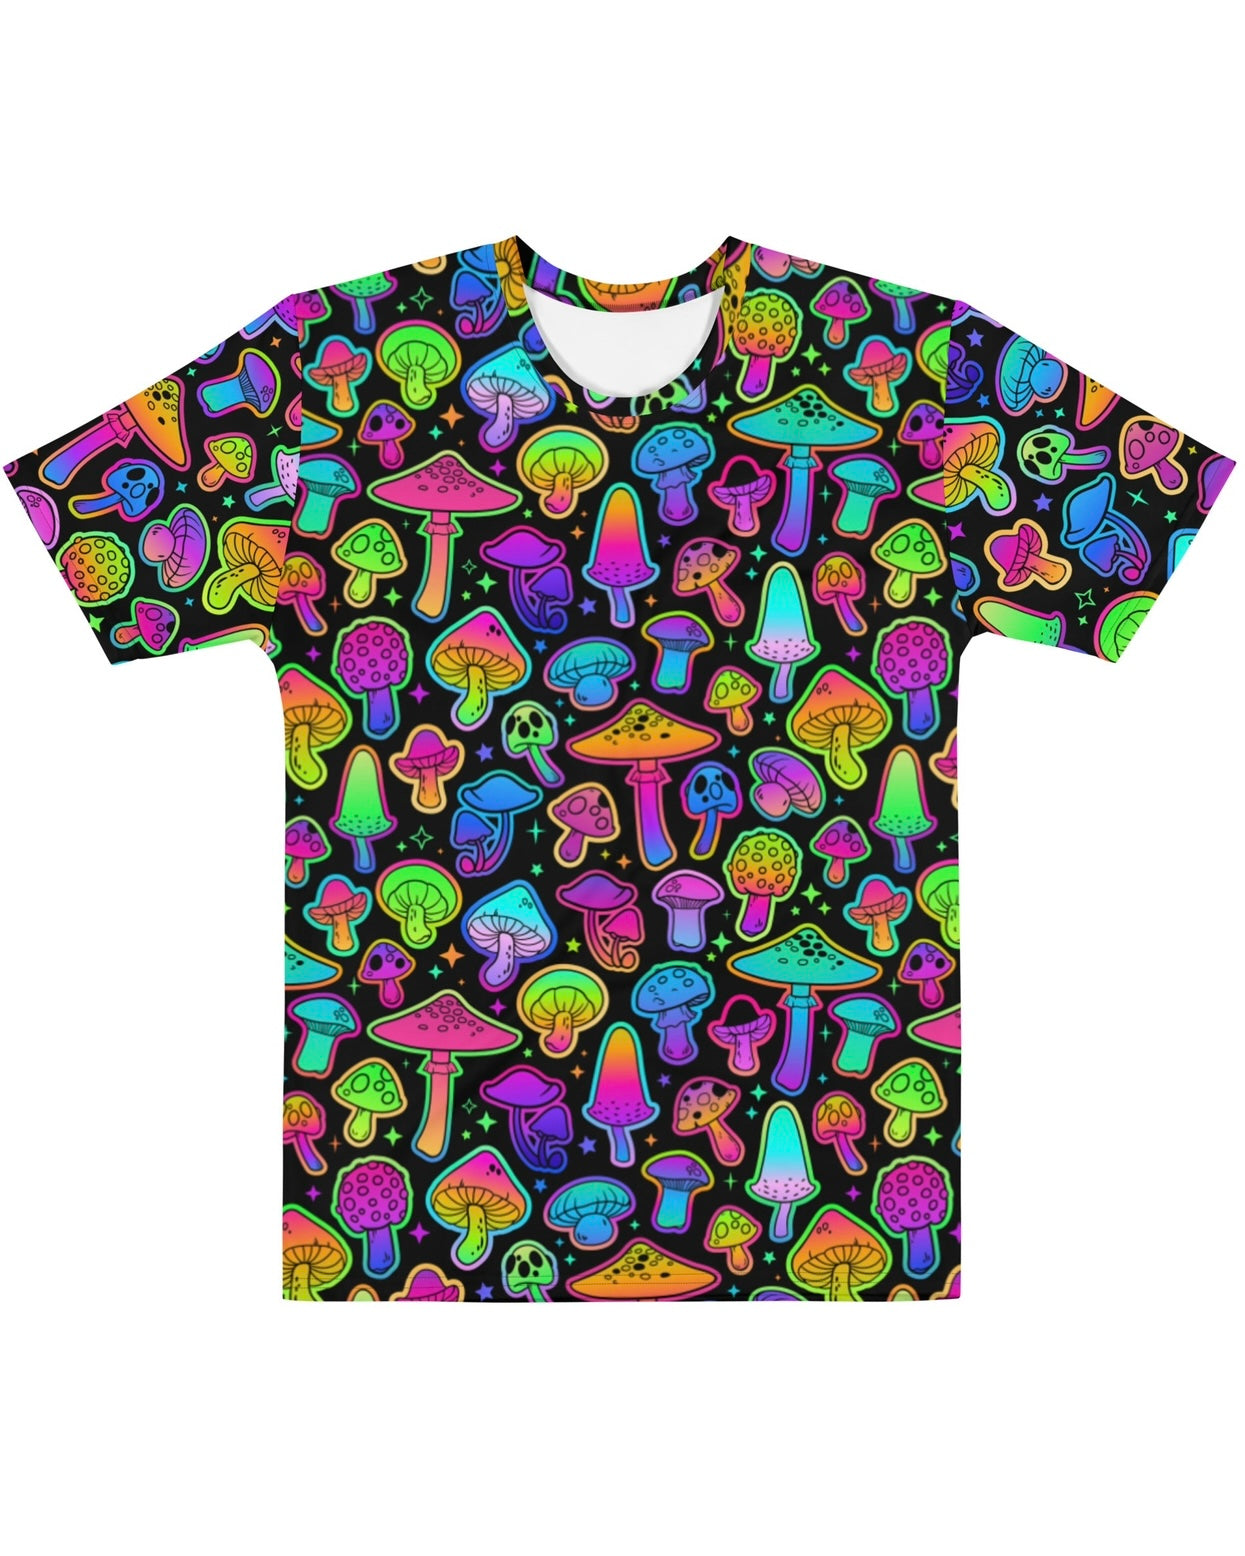 Rave T-Shirts, Unique Festival and Rave Tees